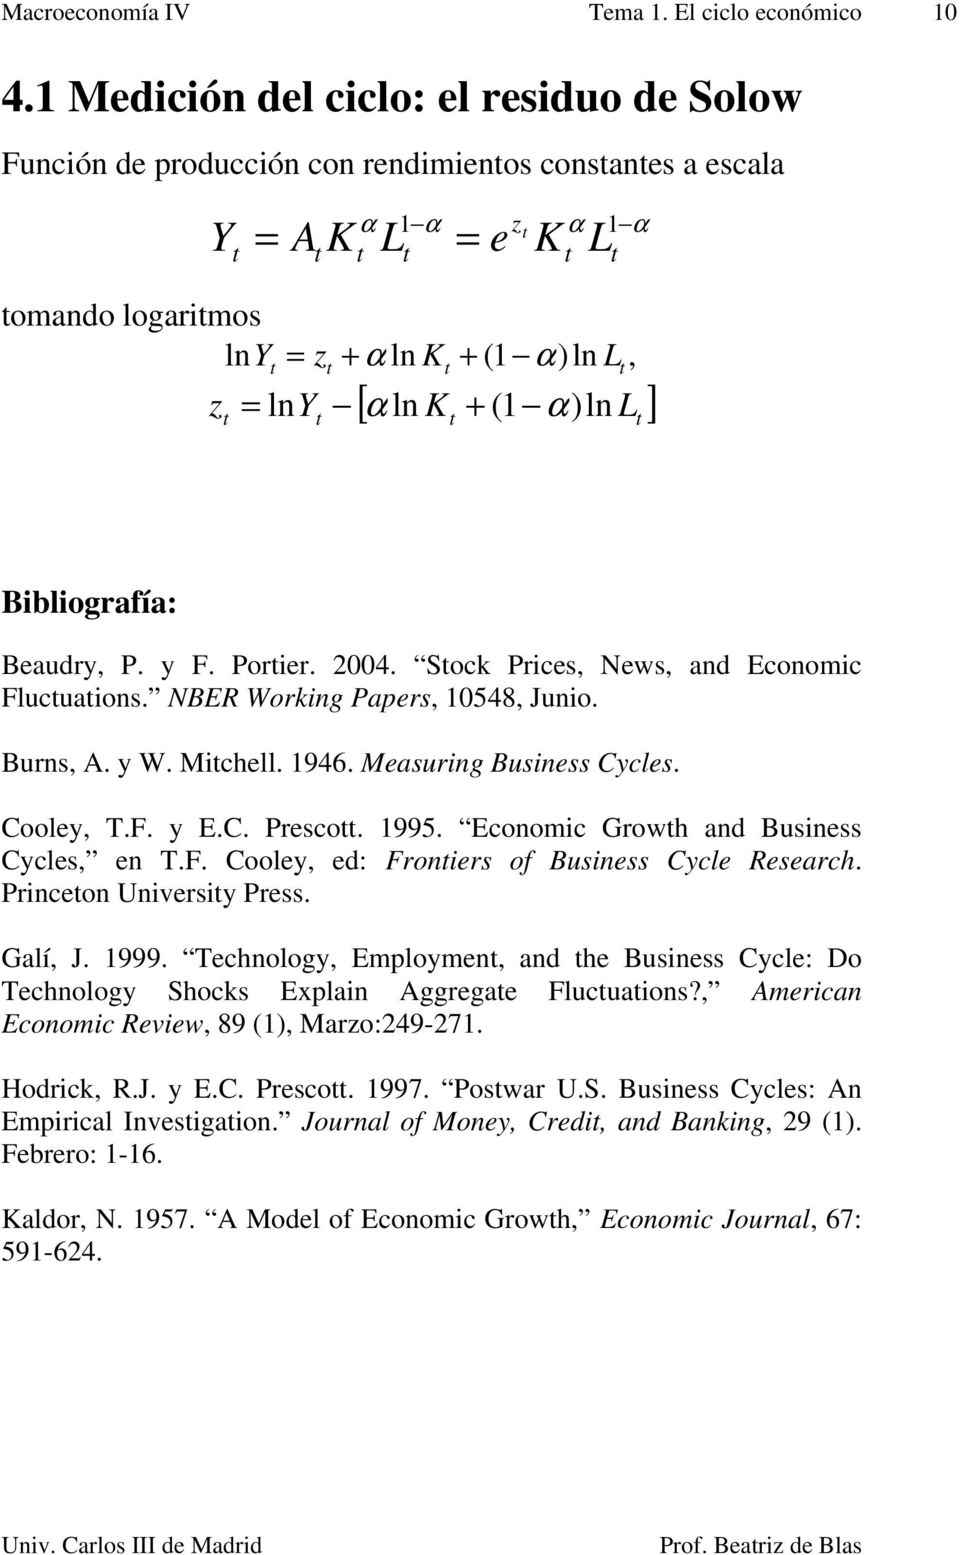 Sock Prices News and Economic lucuaions. NBER Working Papers 0548 Junio. Burns. y W. Michell. 946. Measuring Business Cycles. Cooley T.. y E.C. Presco. 995. Economic Growh and Business Cycles en T.